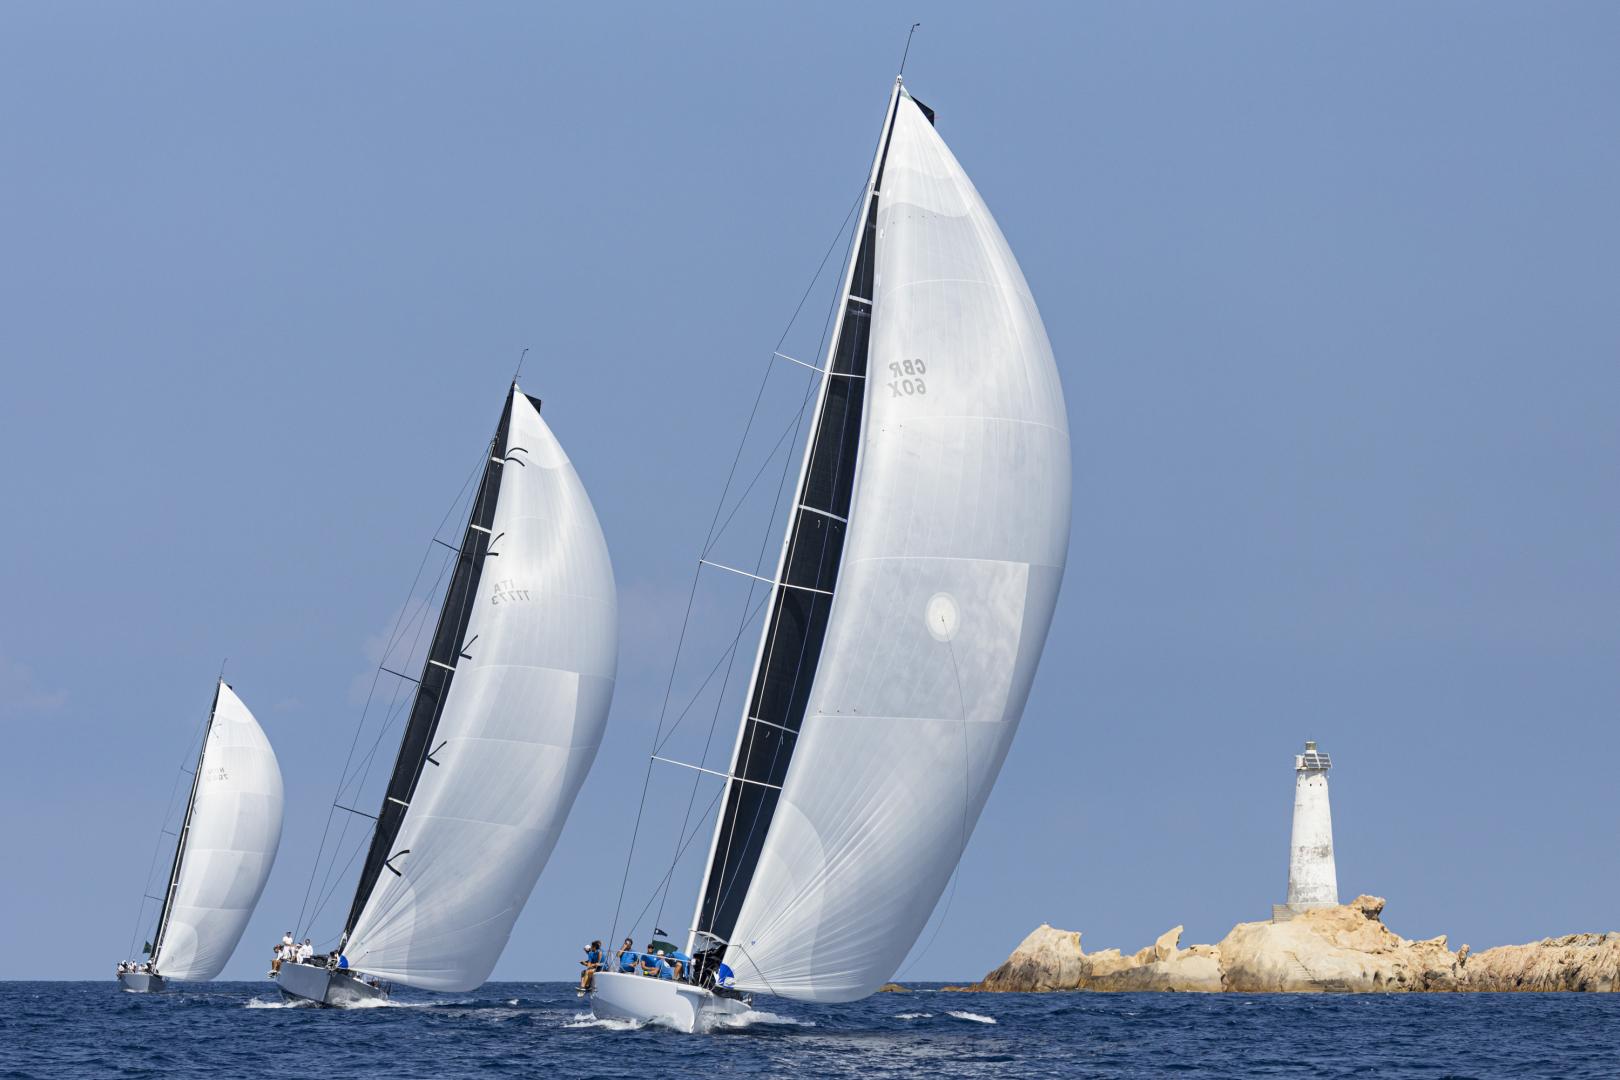 Peter Dubens' Spectre leads around Monaci during the 2019 Maxi Yacht Rolex Cup